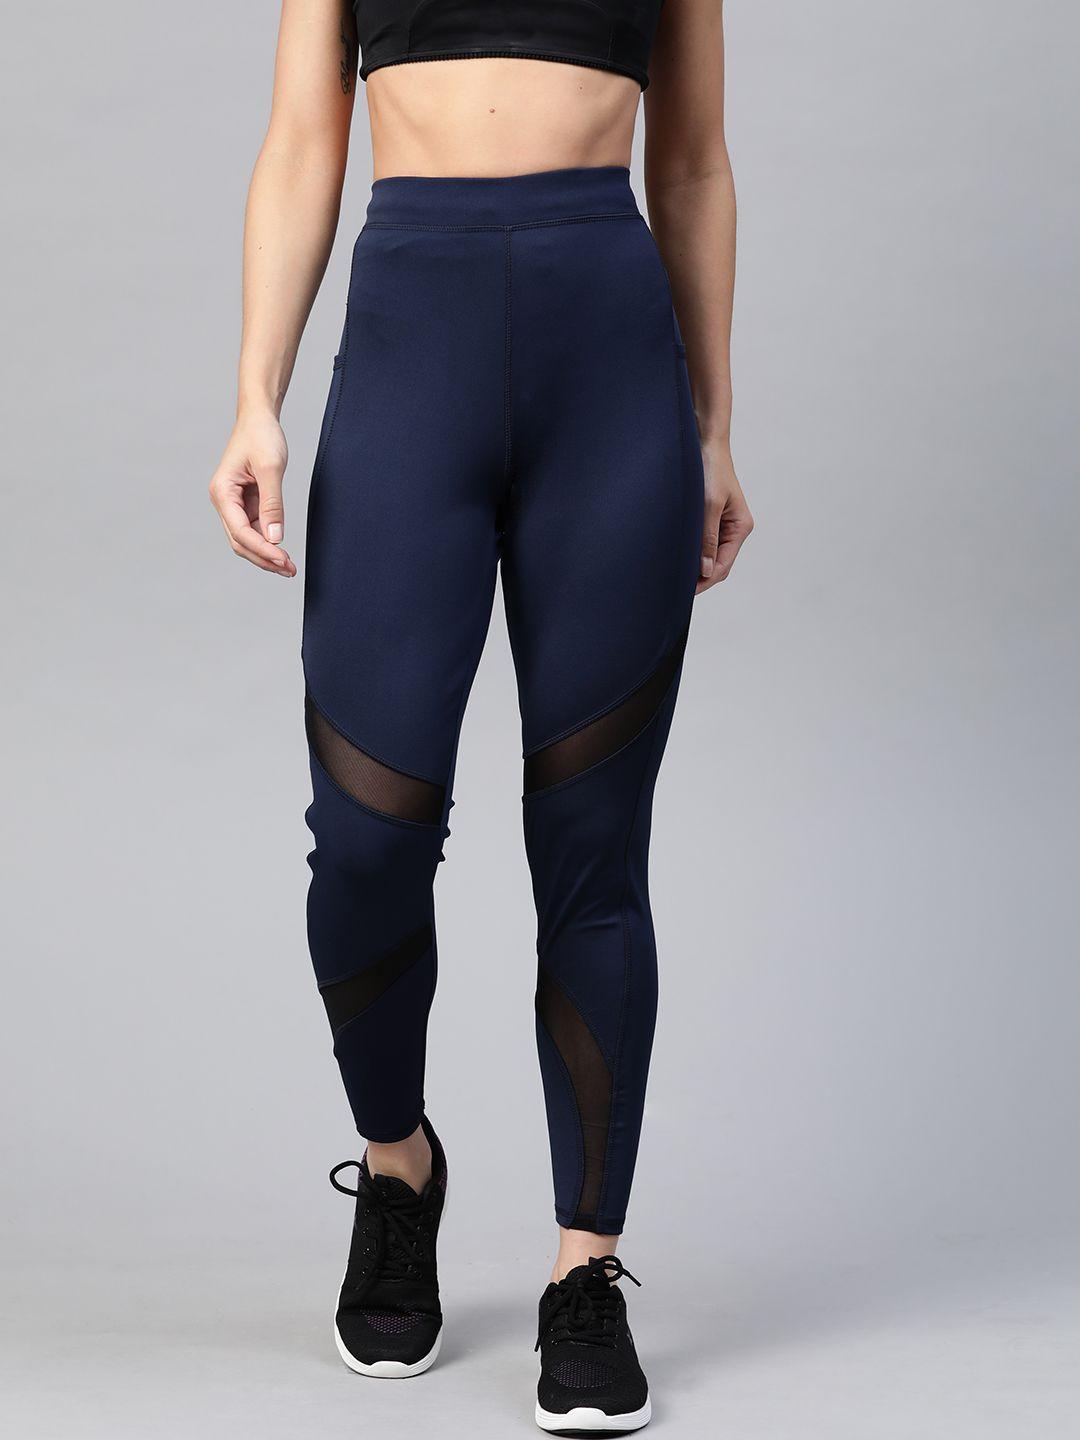 m7 by metronaut women navy blue high-rise solid training tights